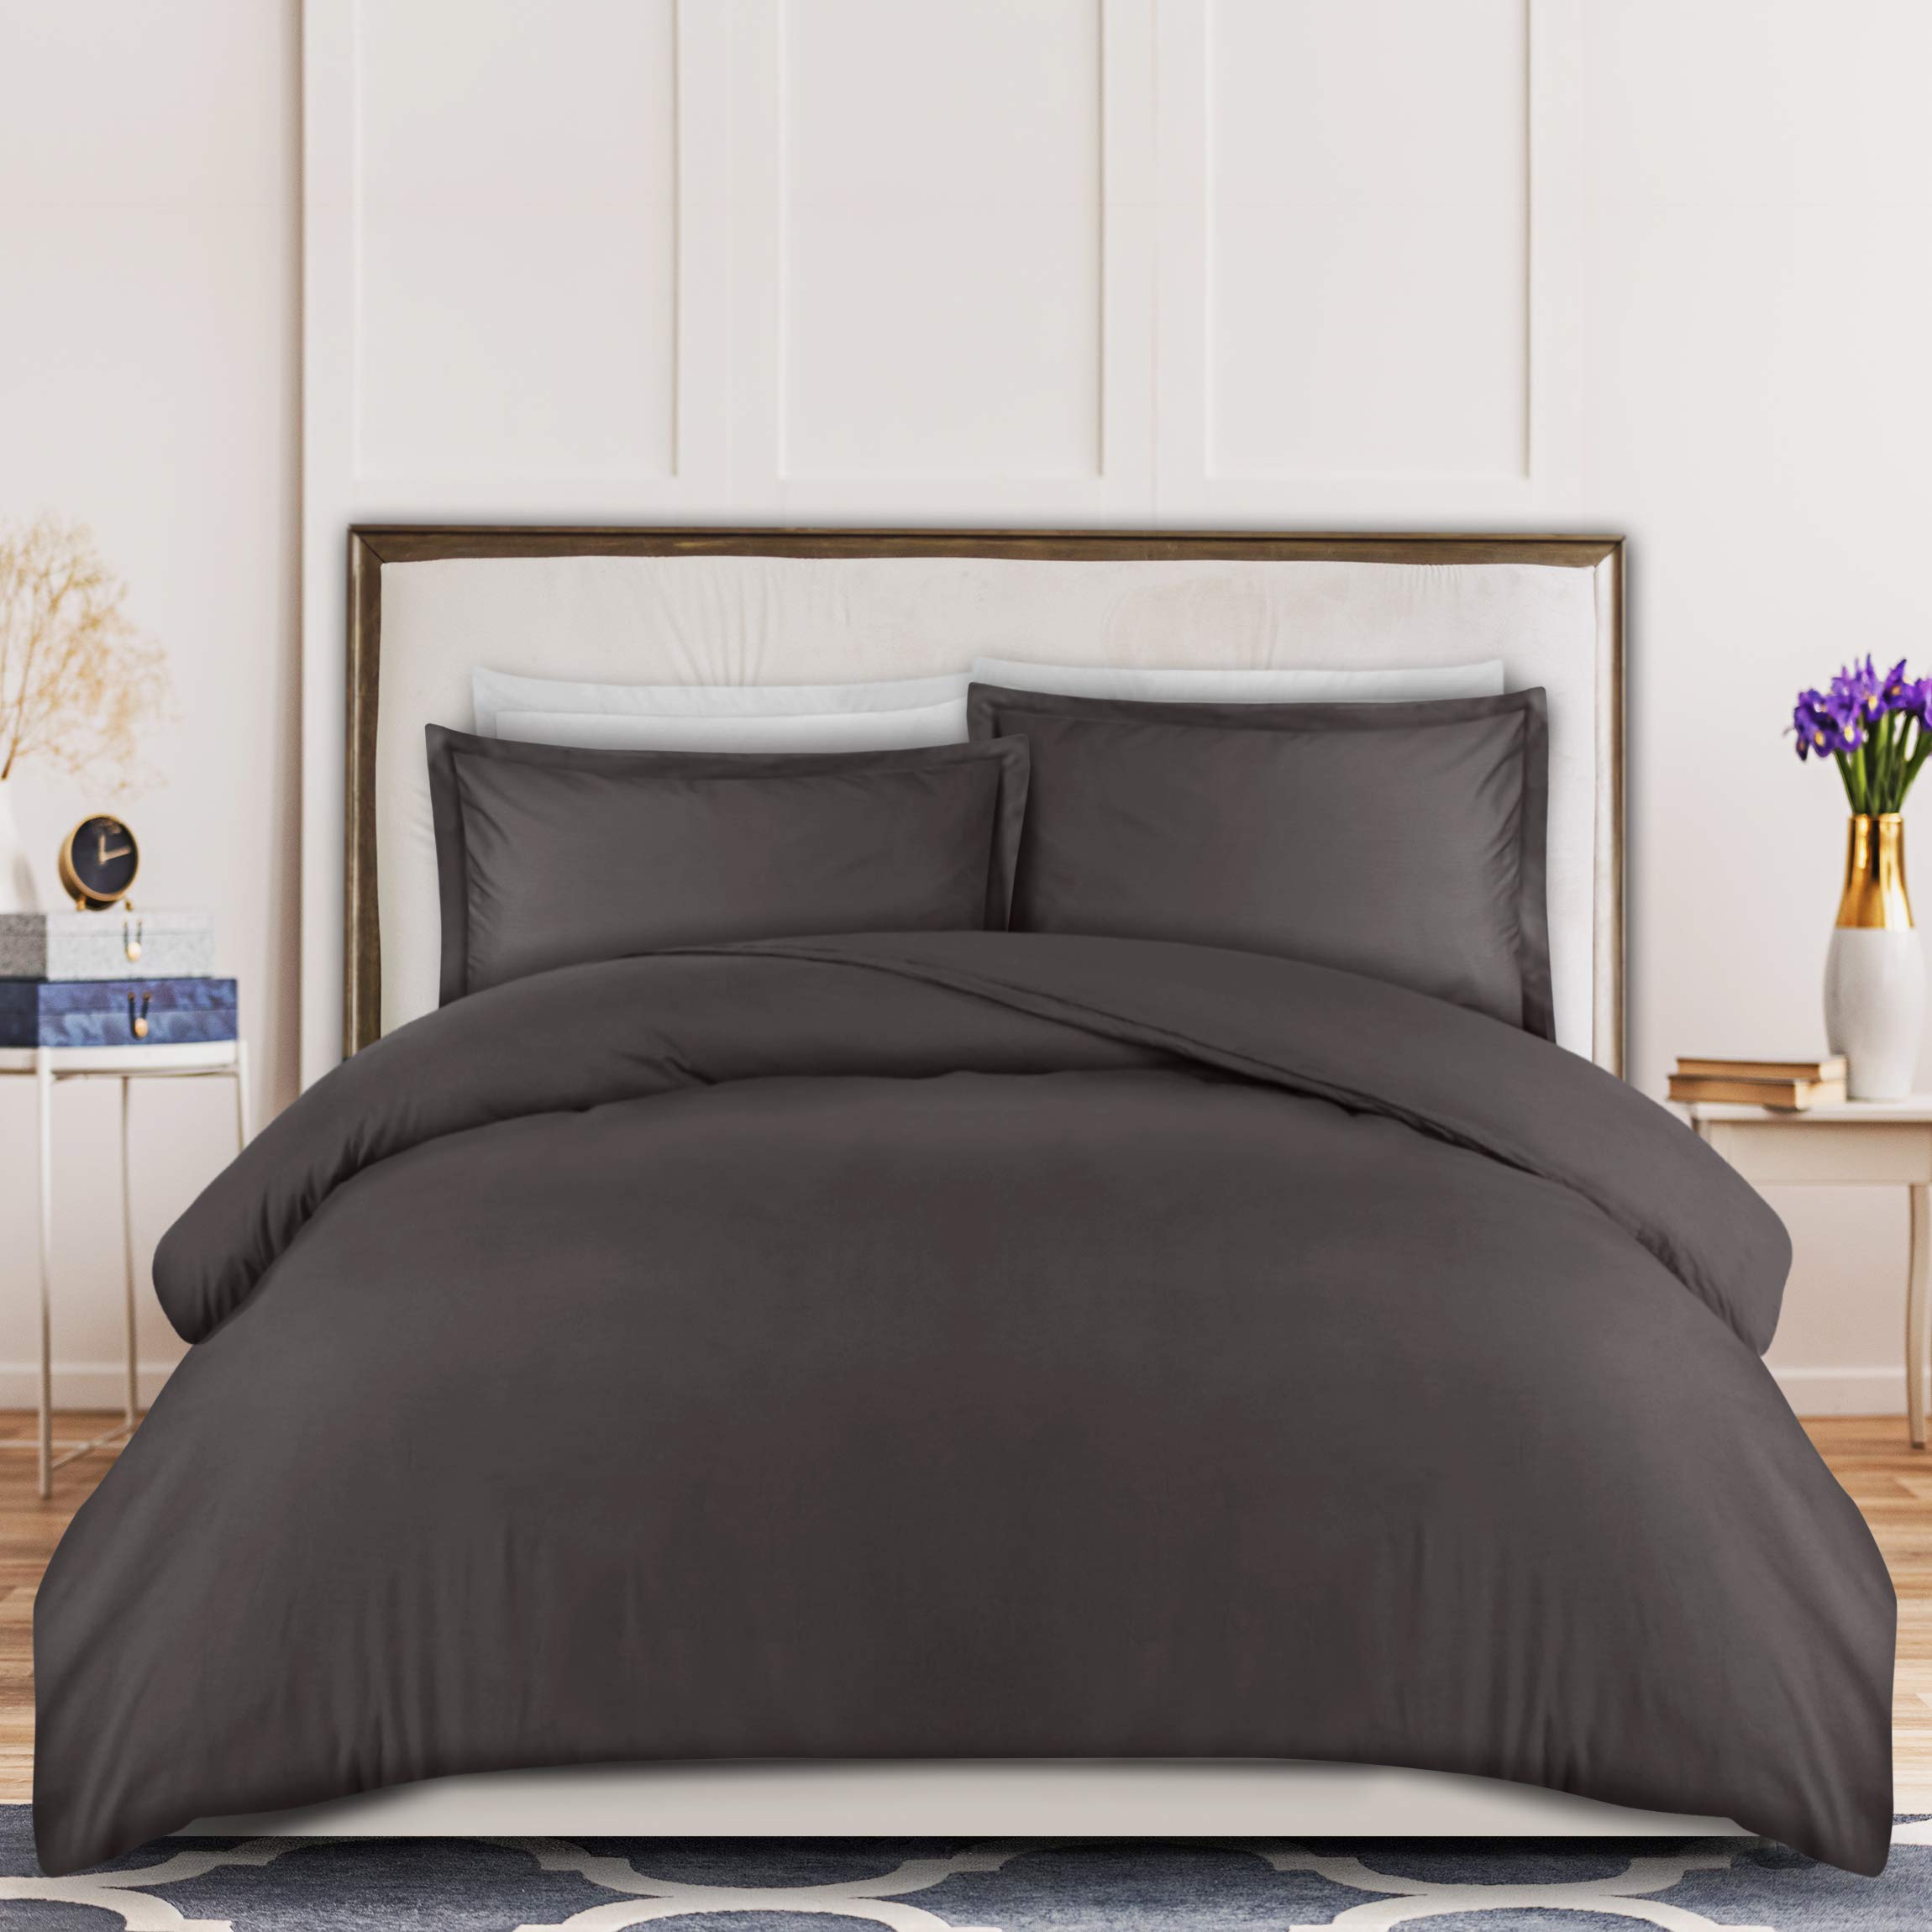 Book Cover Utopia Bedding 3-Piece Duvet Cover Set – 1 Duvet Cover with 2 Pillow Shams - Soft Brushed Microfiber Fabric - Shrinkage and Fade Resistant - Easy Care (Queen, Dark Grey)